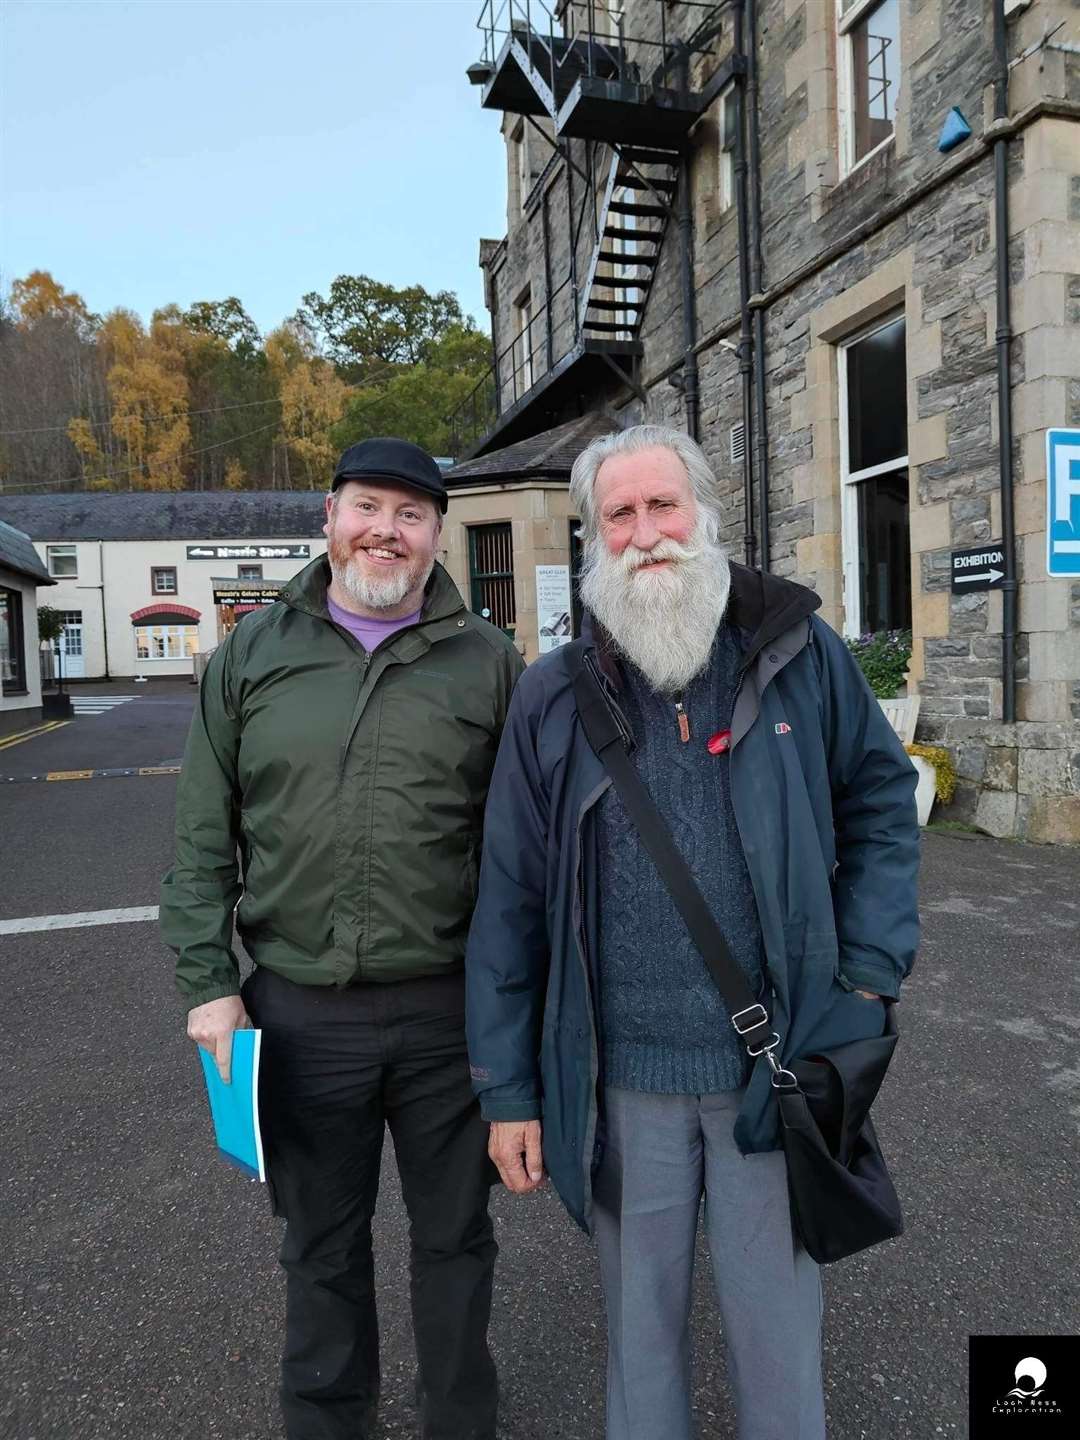 Alan McKenna, of Loch Ness Exploration, with naturalist and Loch Ness Project leader Adrian Shine.